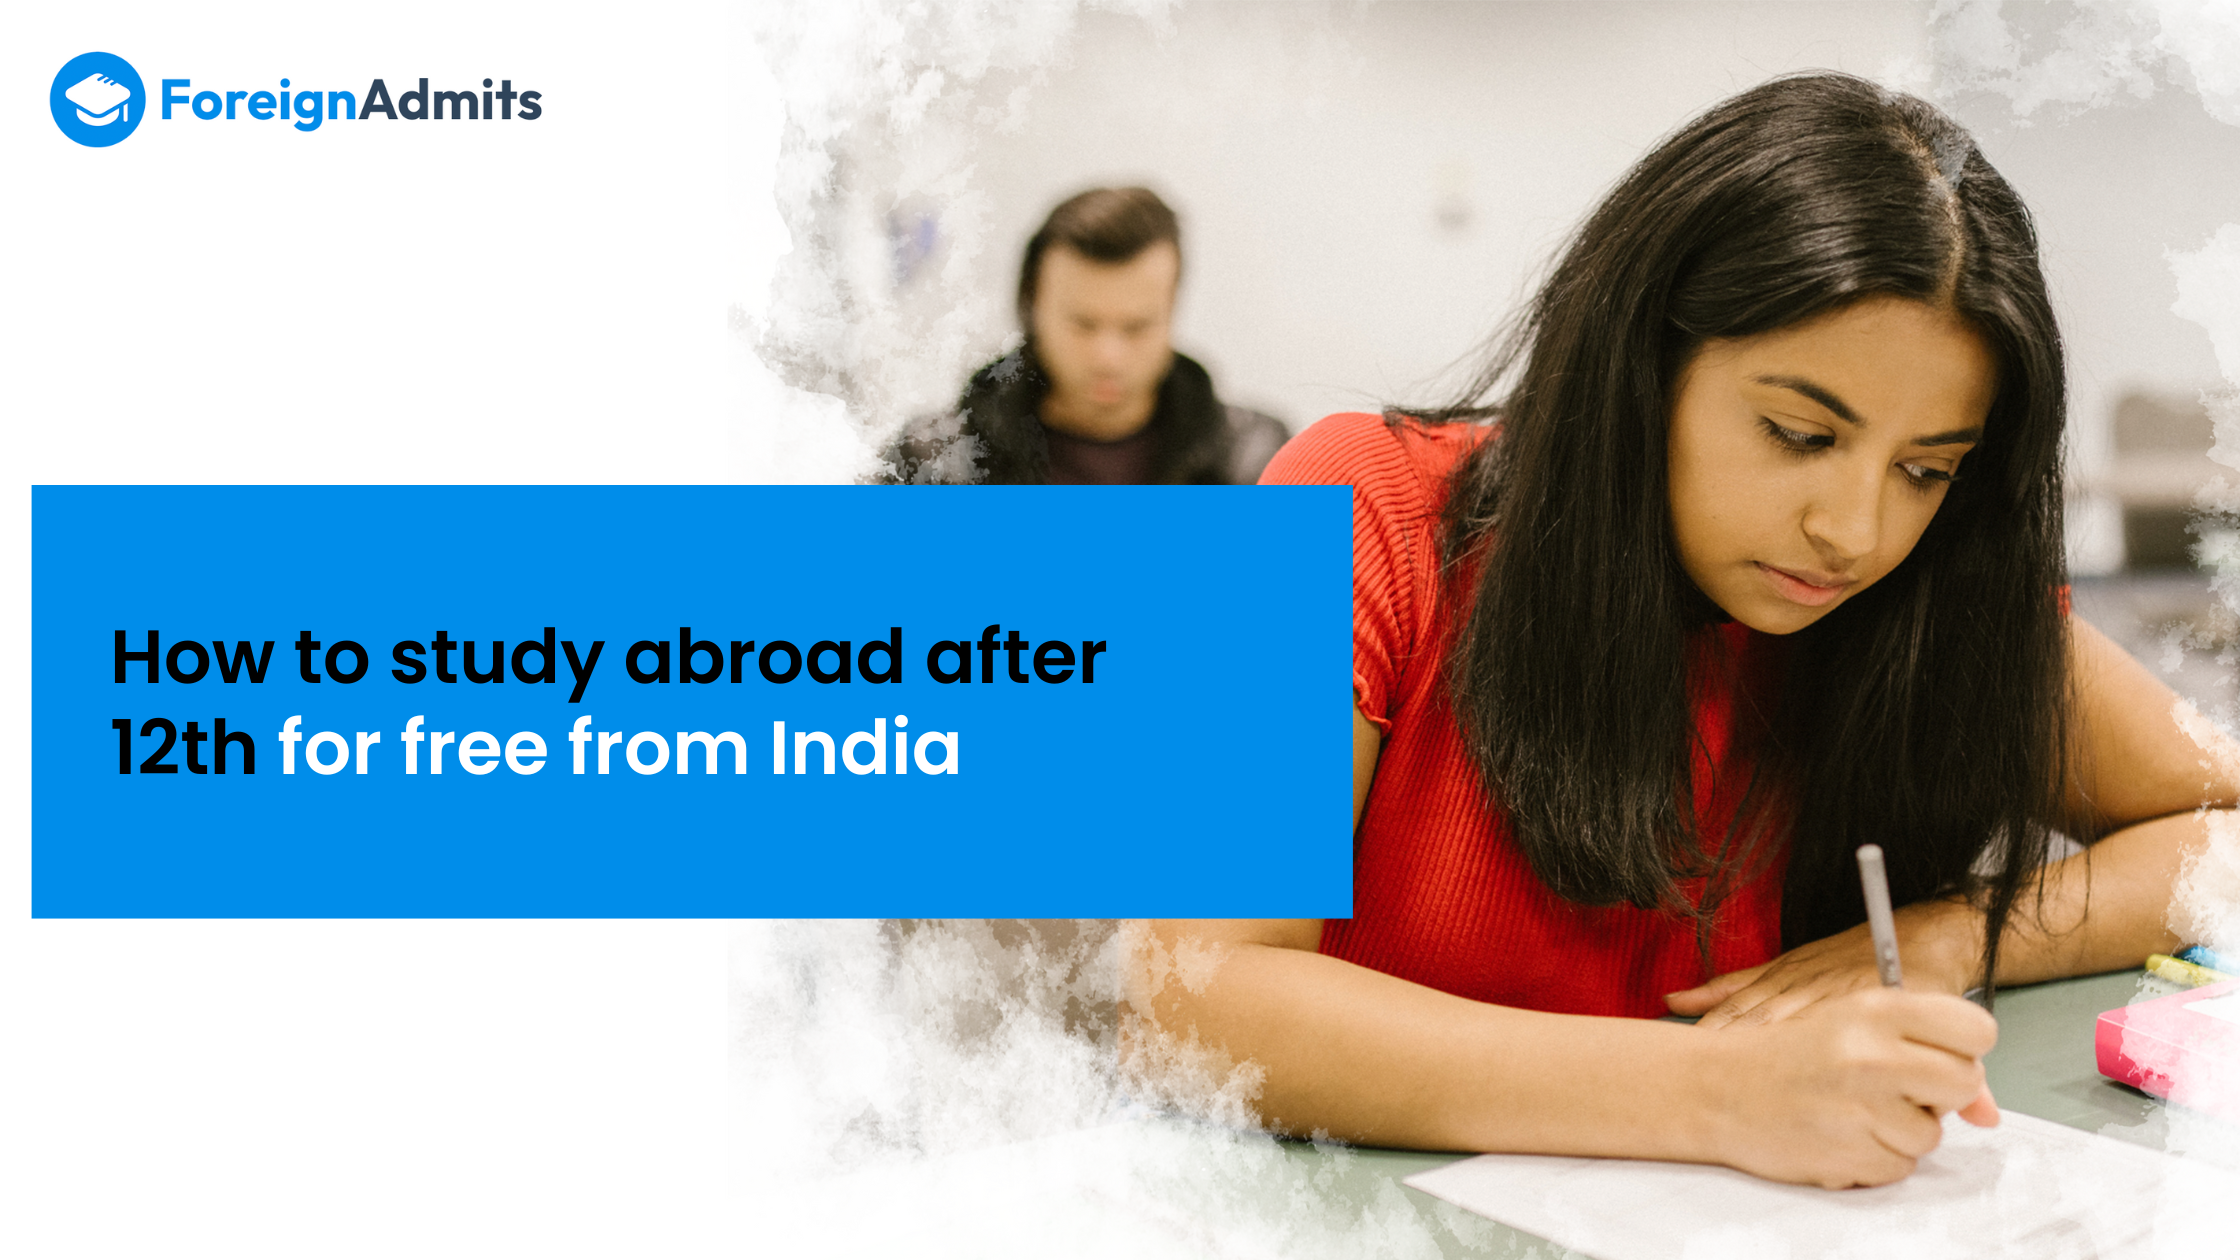 How to Study Abroad for Free After 12 from India?